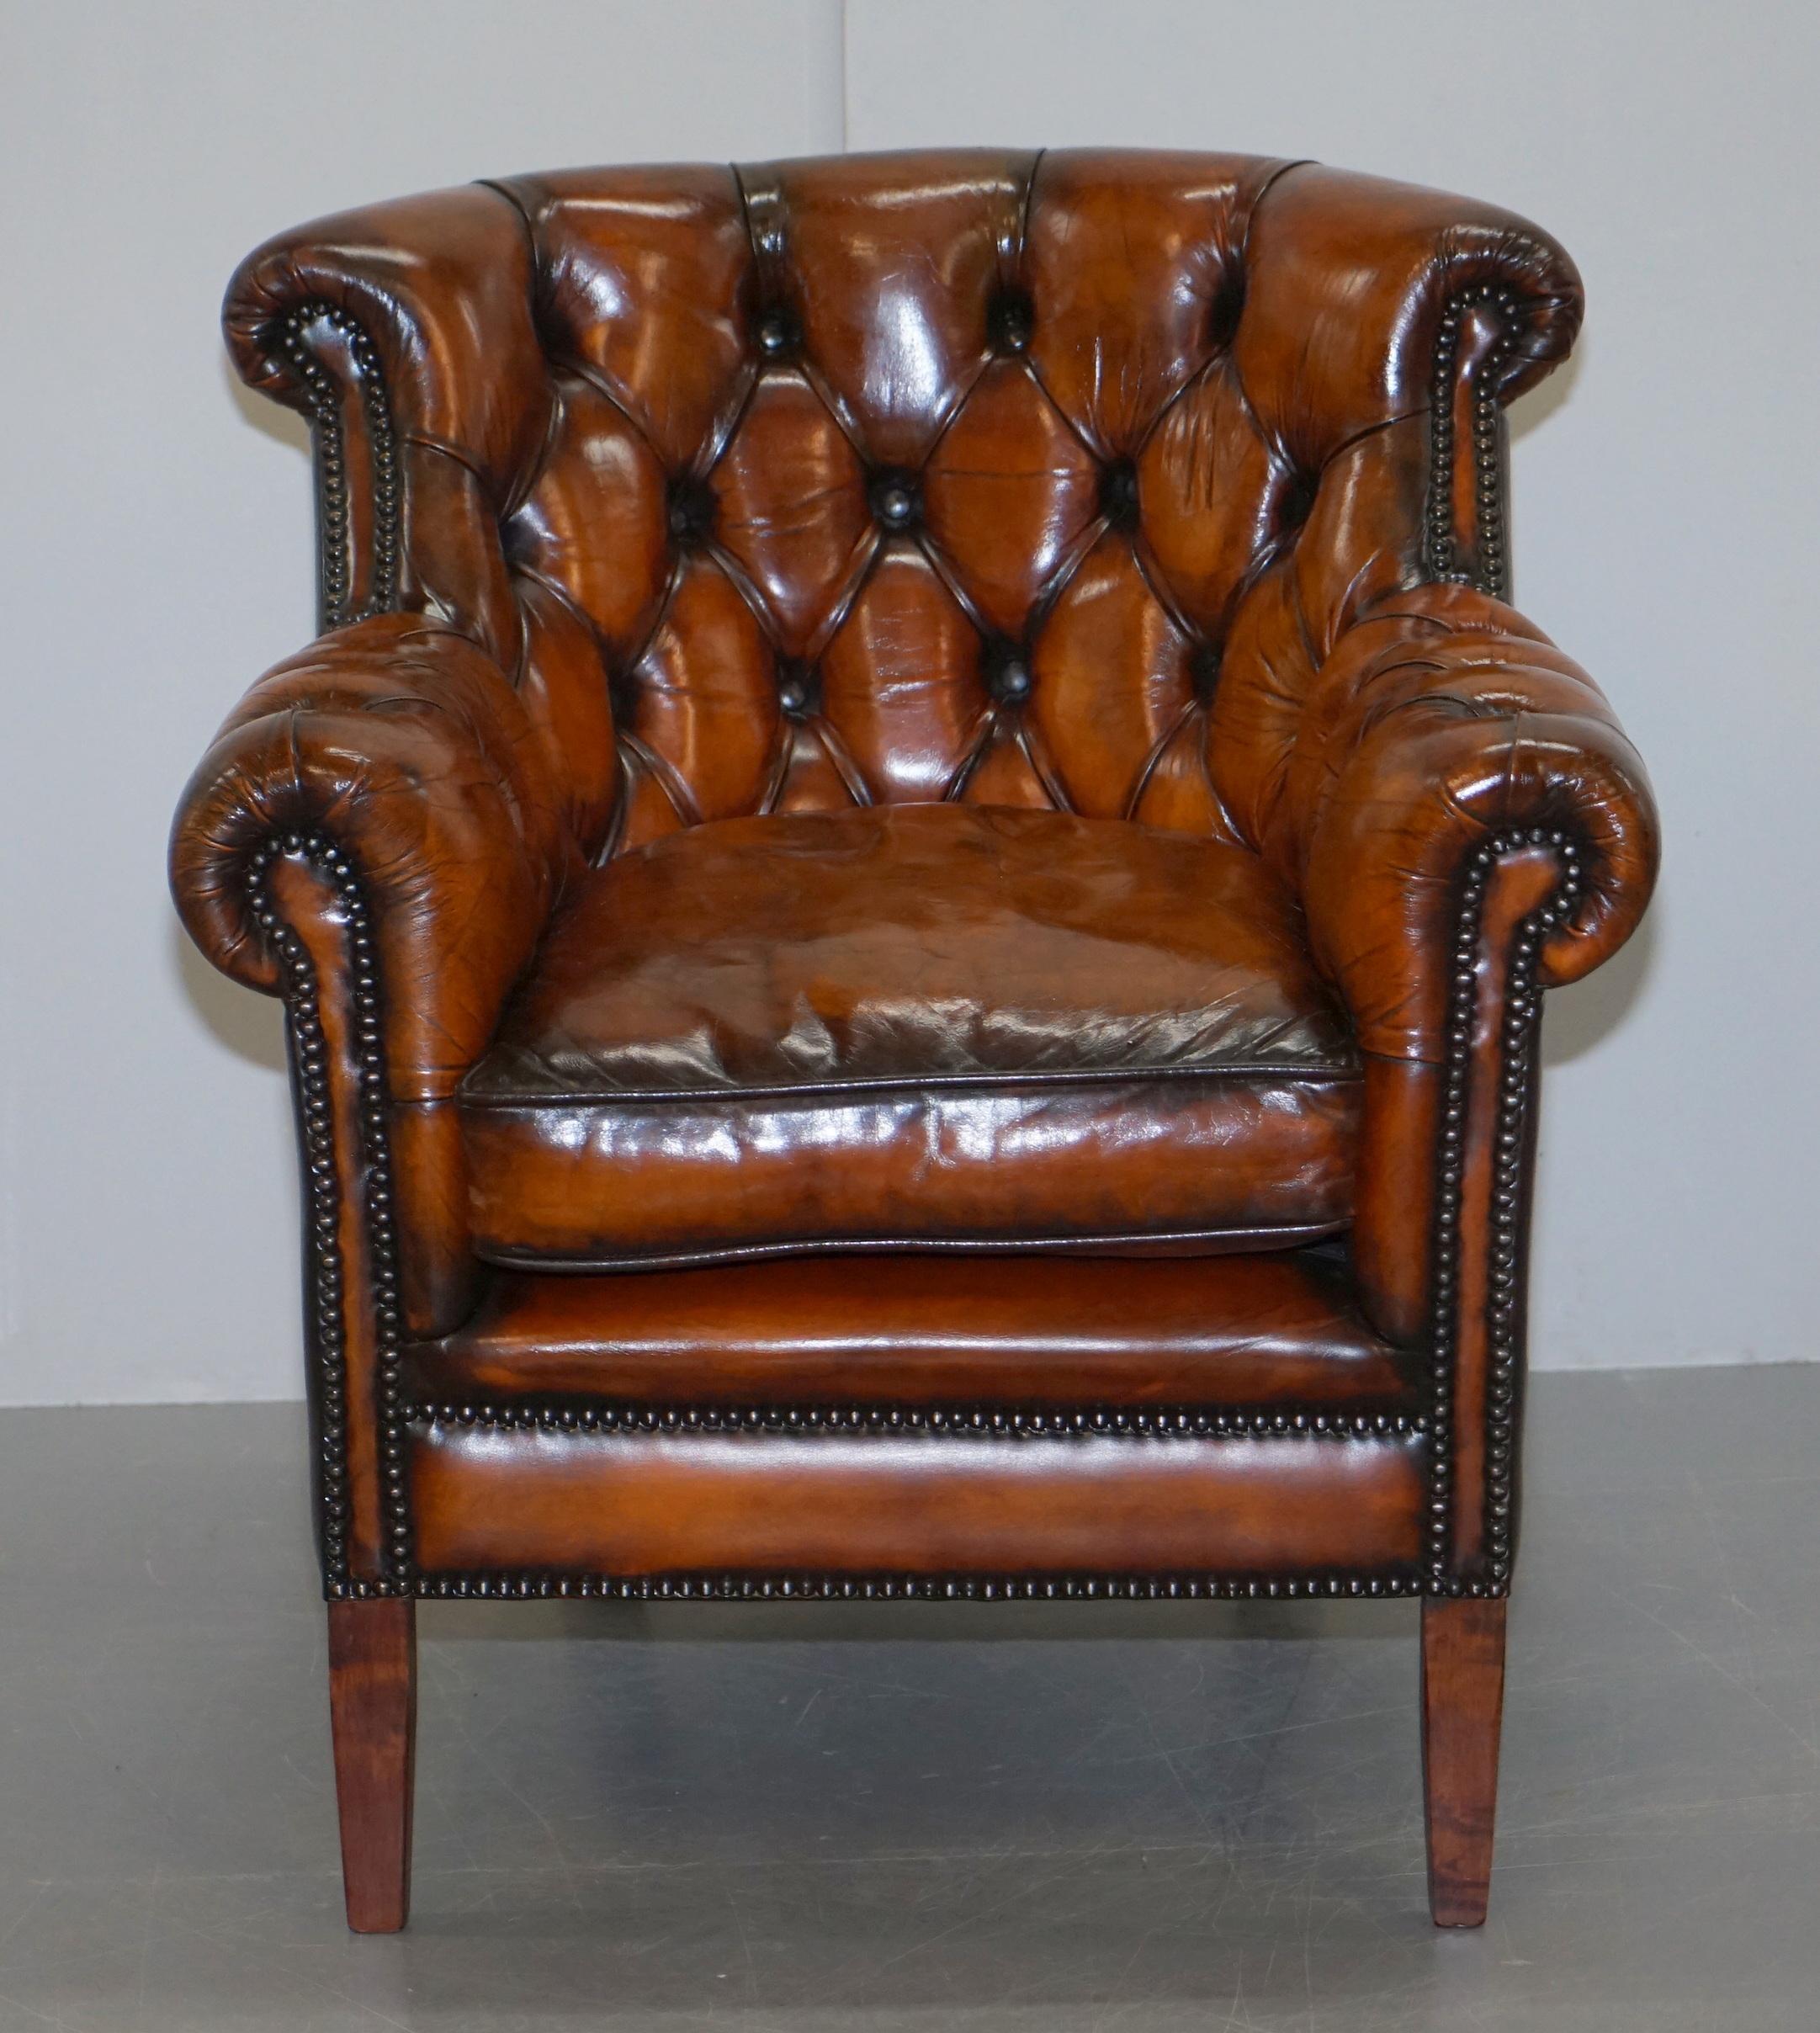 We are delighted to offer for sale this stunning fully restored cigar brown leather Chesterfield library club armchair

A very good looking well made and comfortable vintage armchair. The chair is Chesterfield tufted to the back and arms, the seat